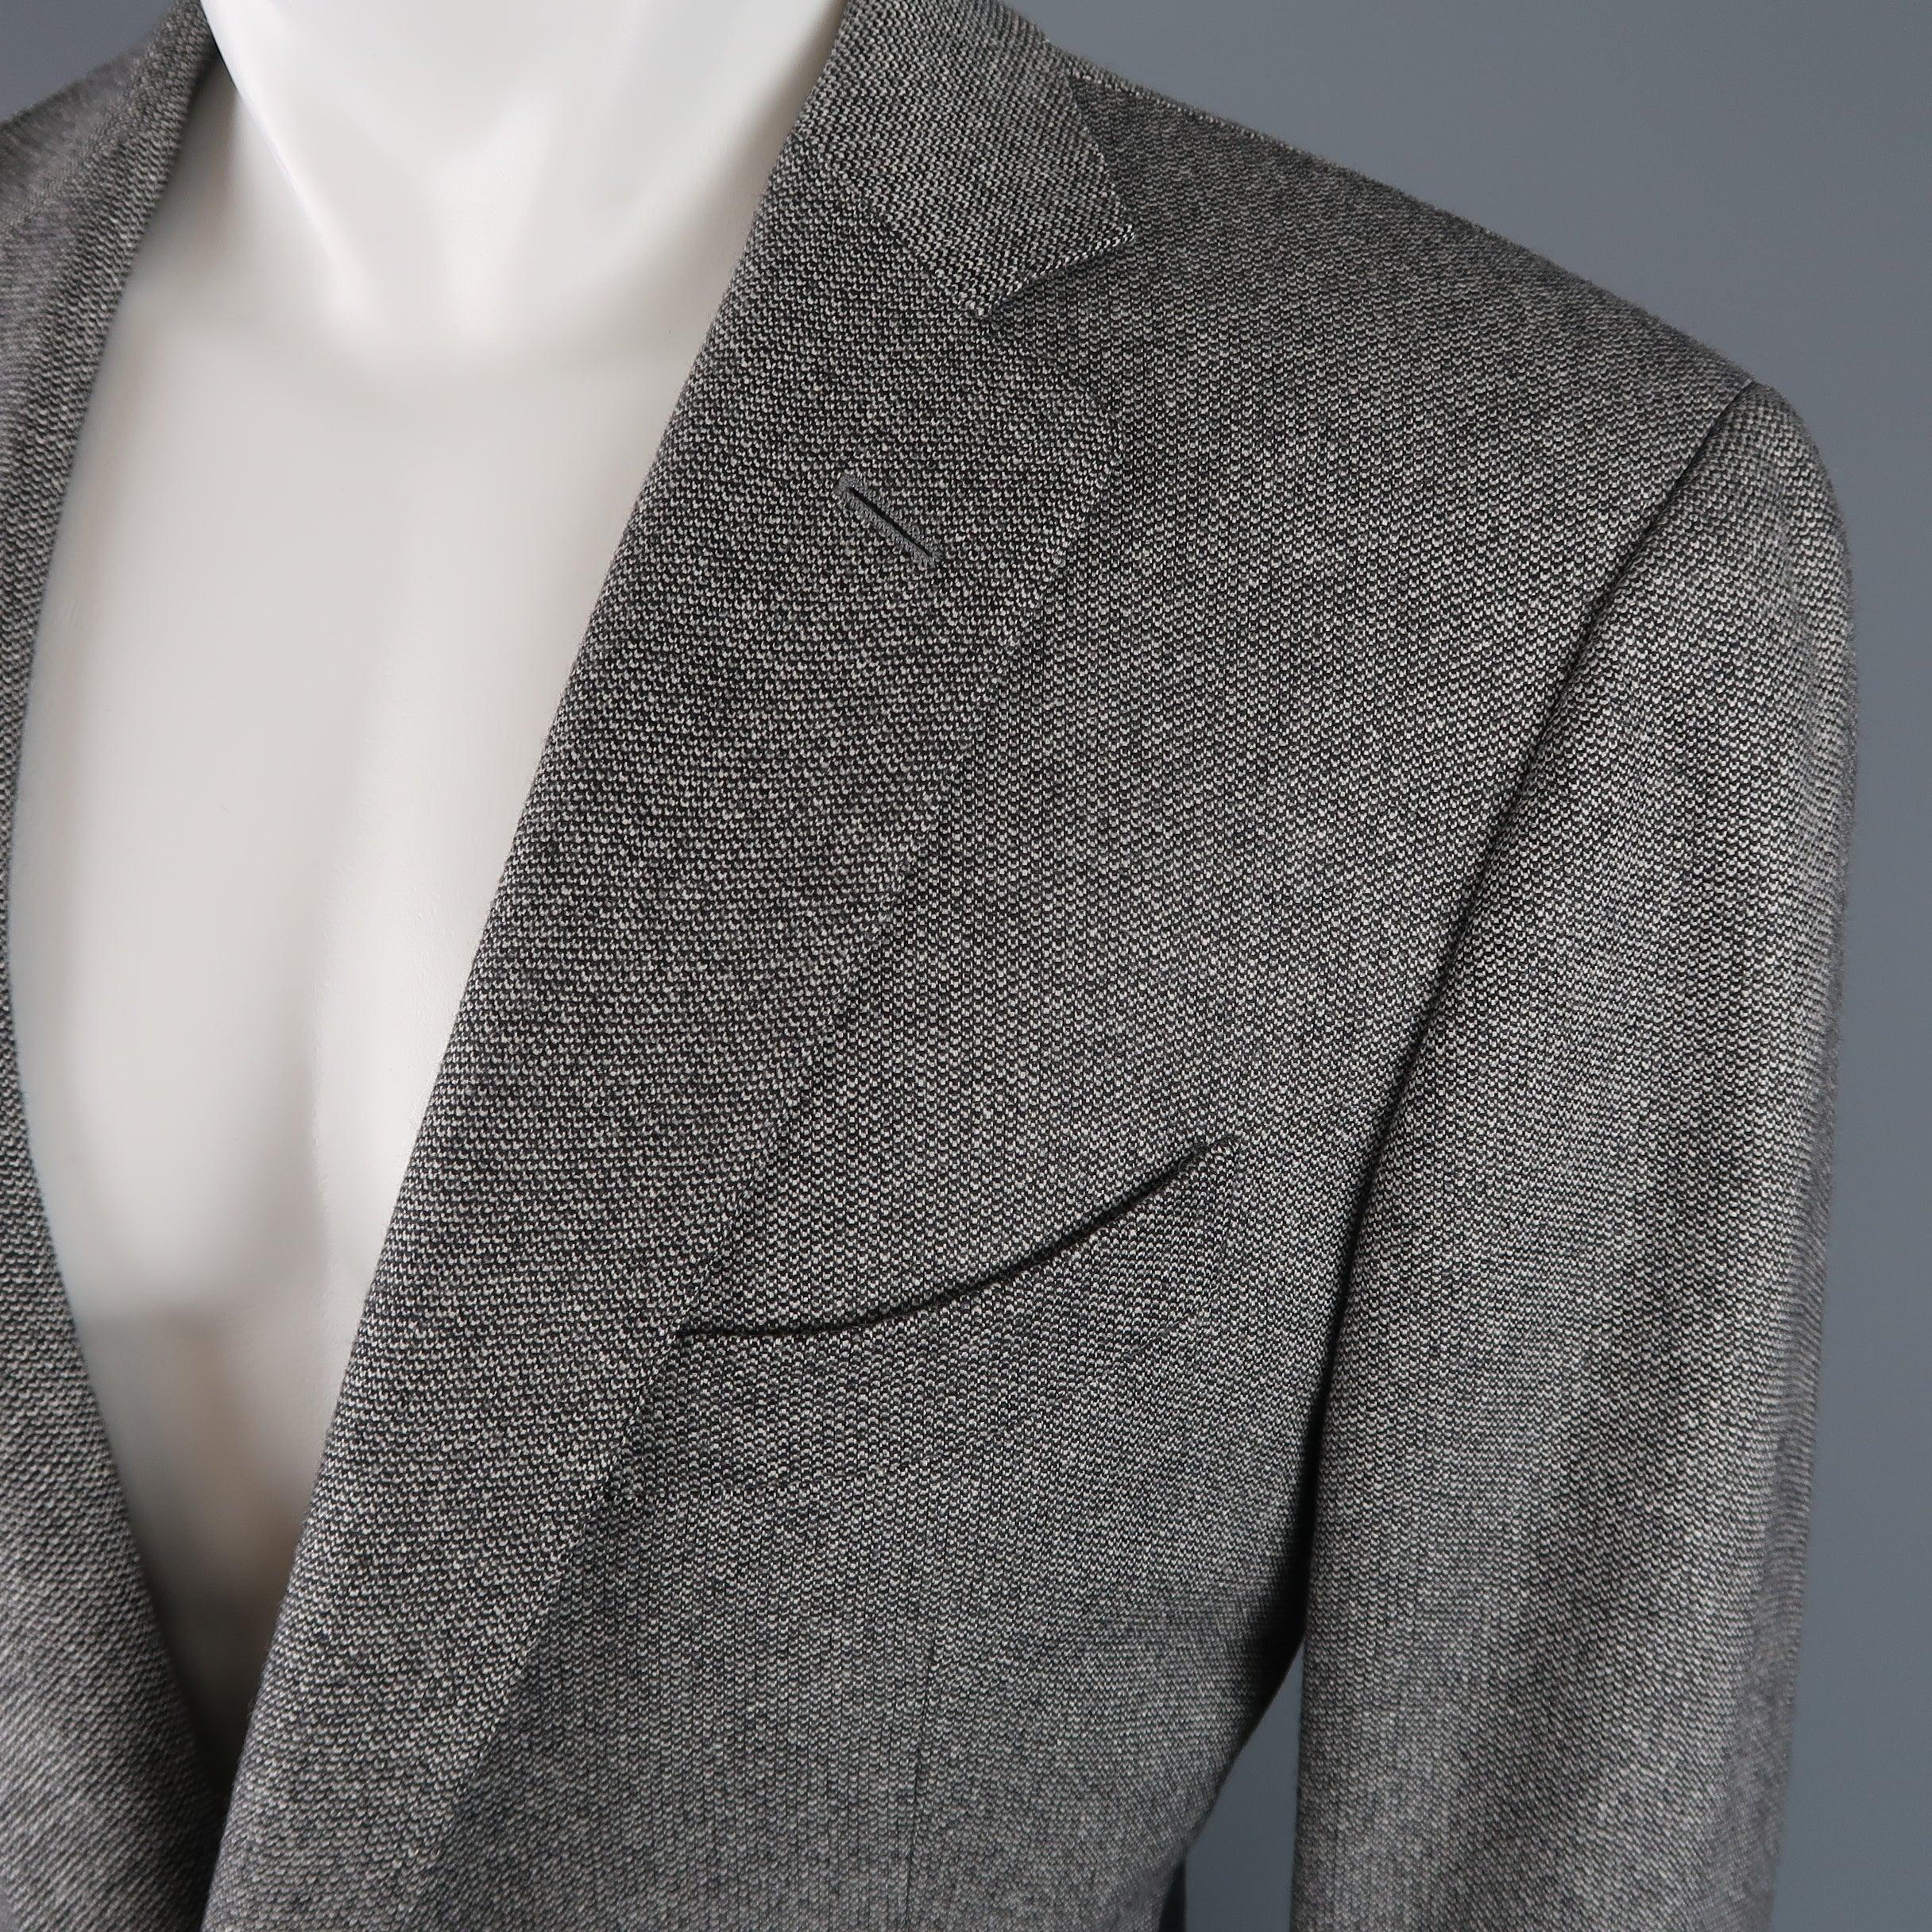 Single breasted ERMENEGILDO ZEGNA sport coat comes in gray heathered wool cashmere with a notch lapel, two button front, and double vented back. Cracks in front buttons. As-is. Made in Italy.Good Pre-Owned Condition. 

Marked:   IT 54